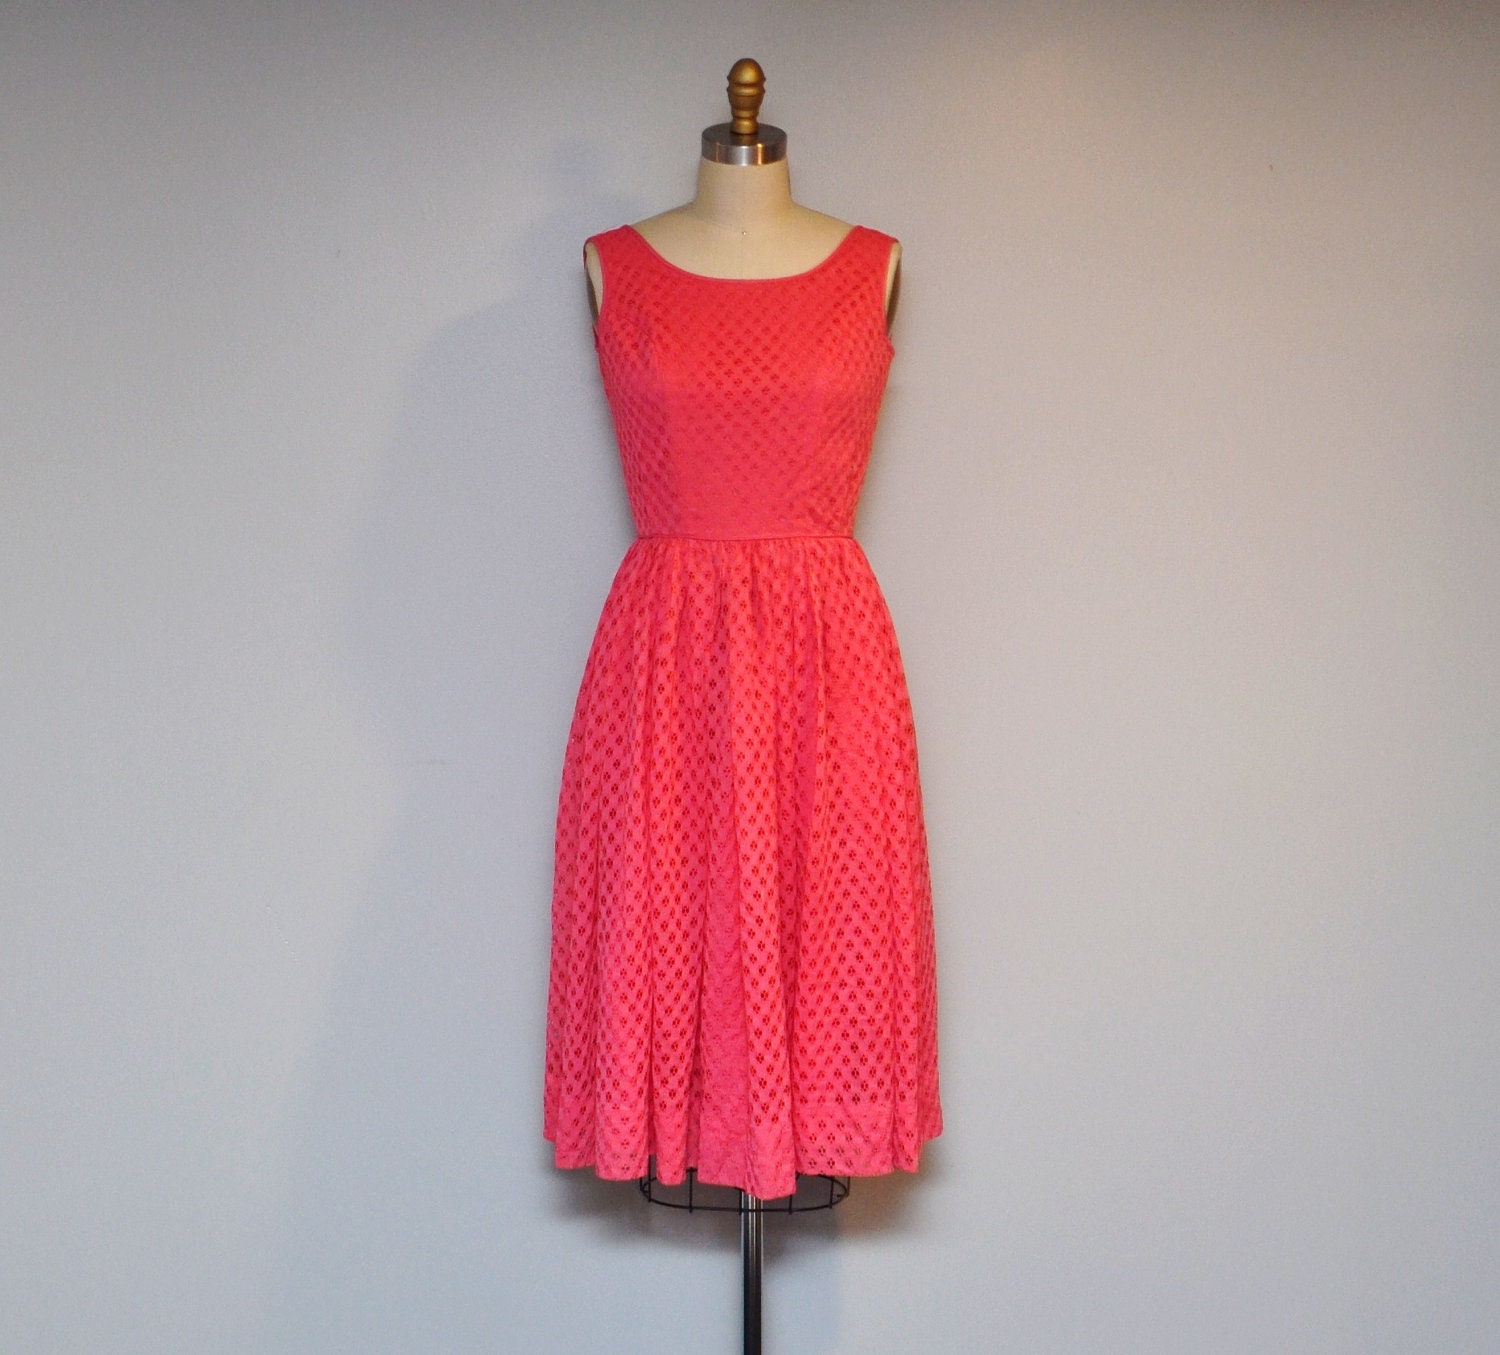 Vintage 50s/60s Eyelet Pink Salmon DRESS size aprox small 2/4